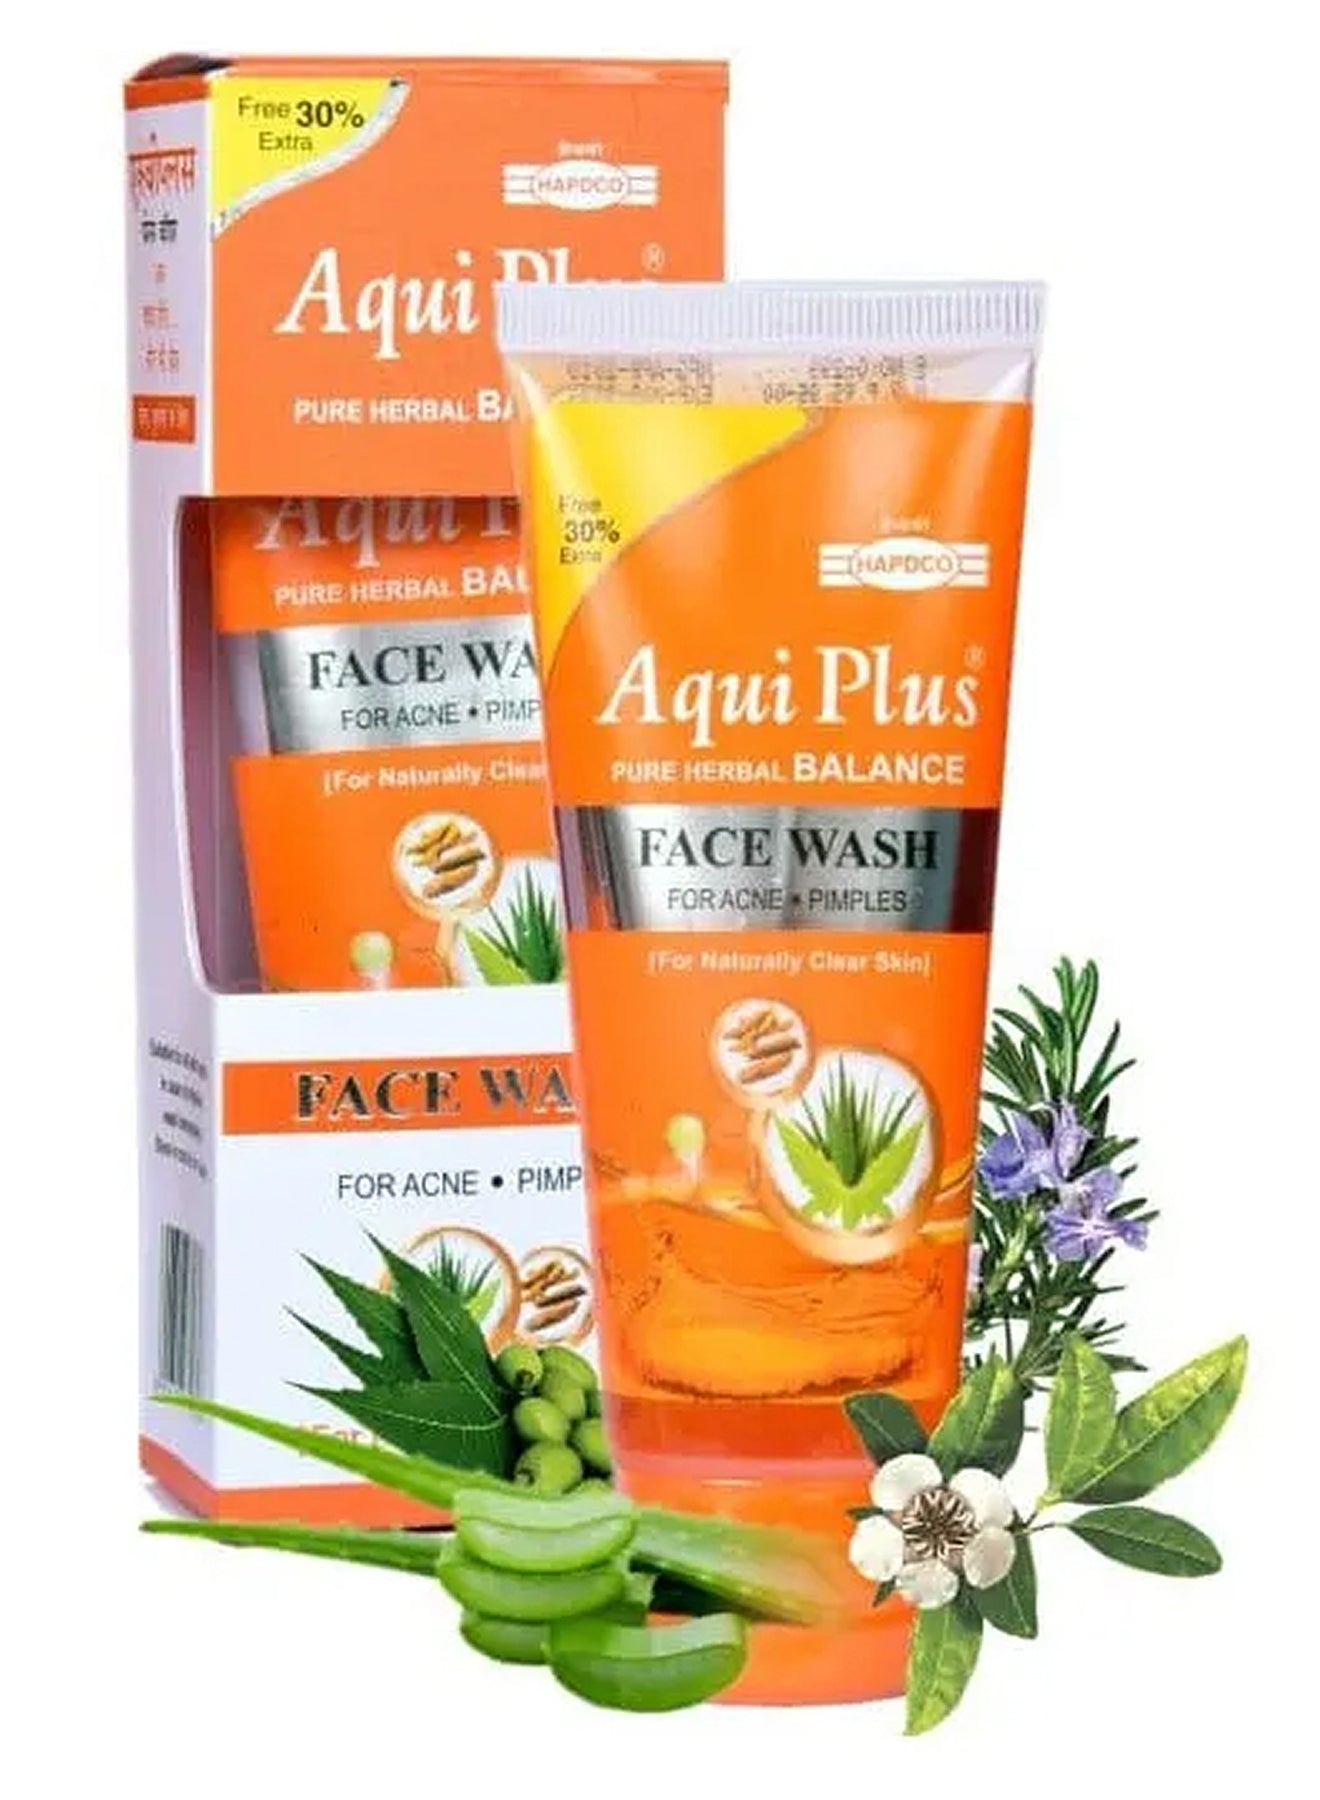 Aqui Plus Pure Herbal Balance For Acne Pimples Face Wash 65 ml Value Pack of 4 